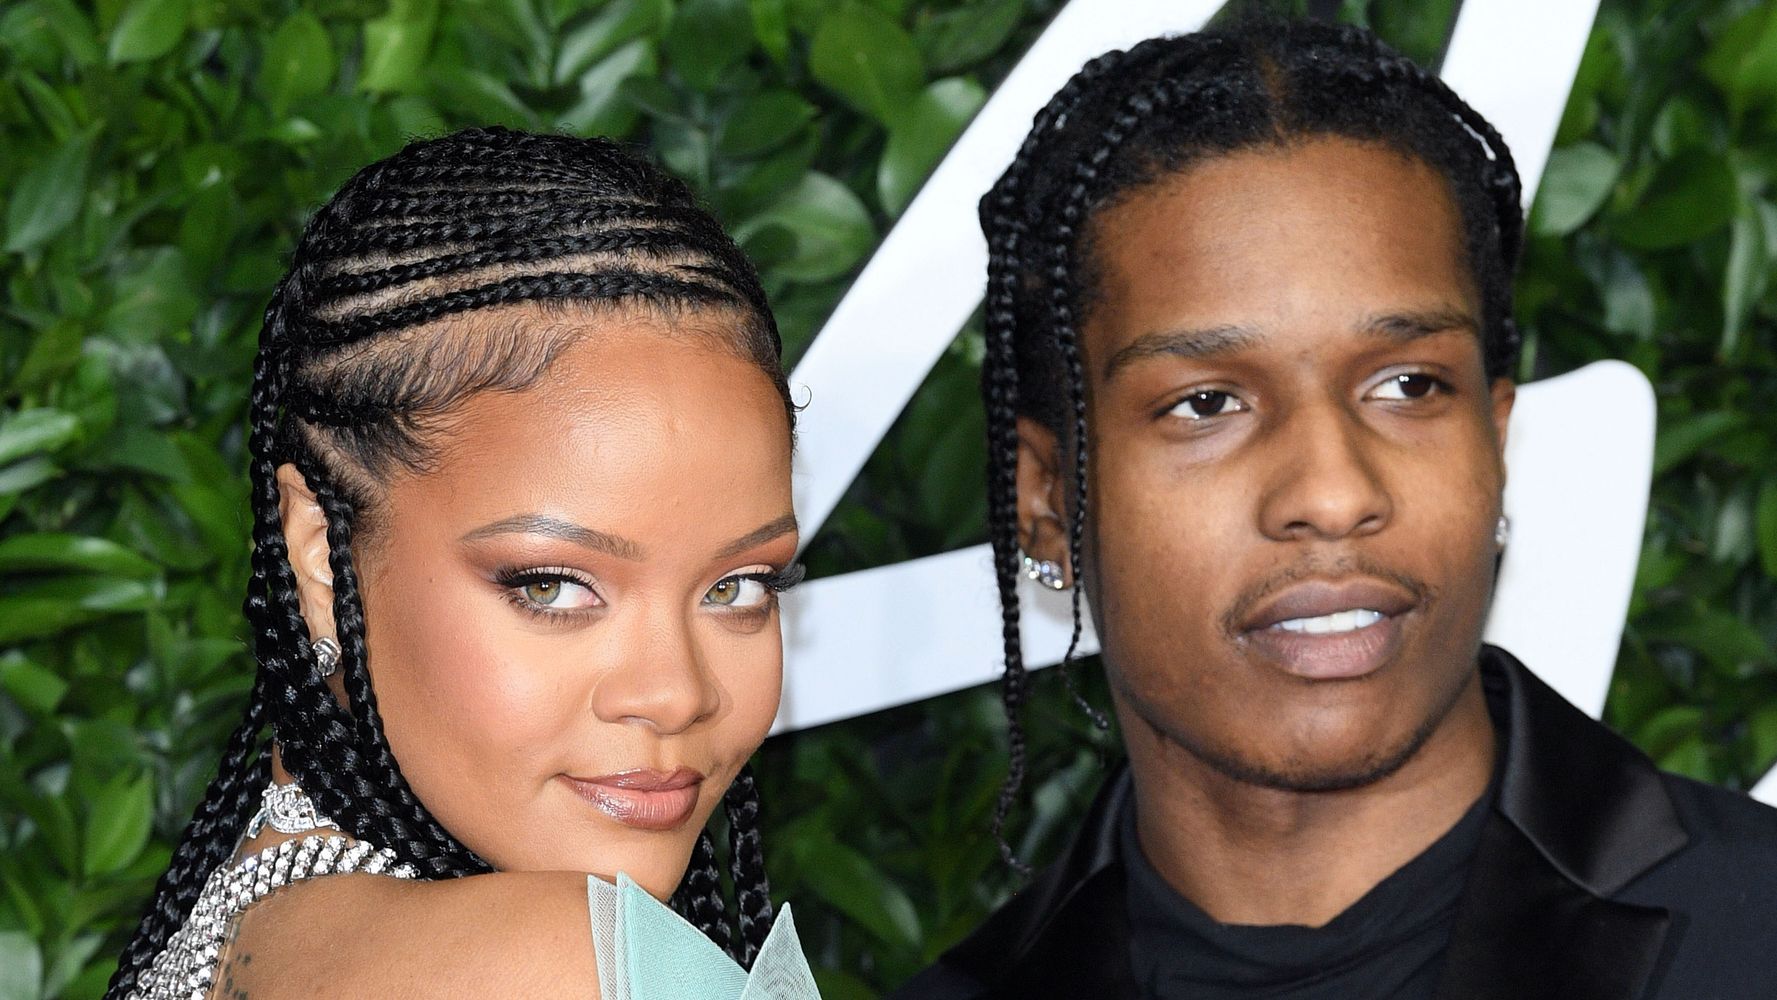 A$AP Rocky Confirms Rihanna Romance, Calls Her 'The Love Of My Life'